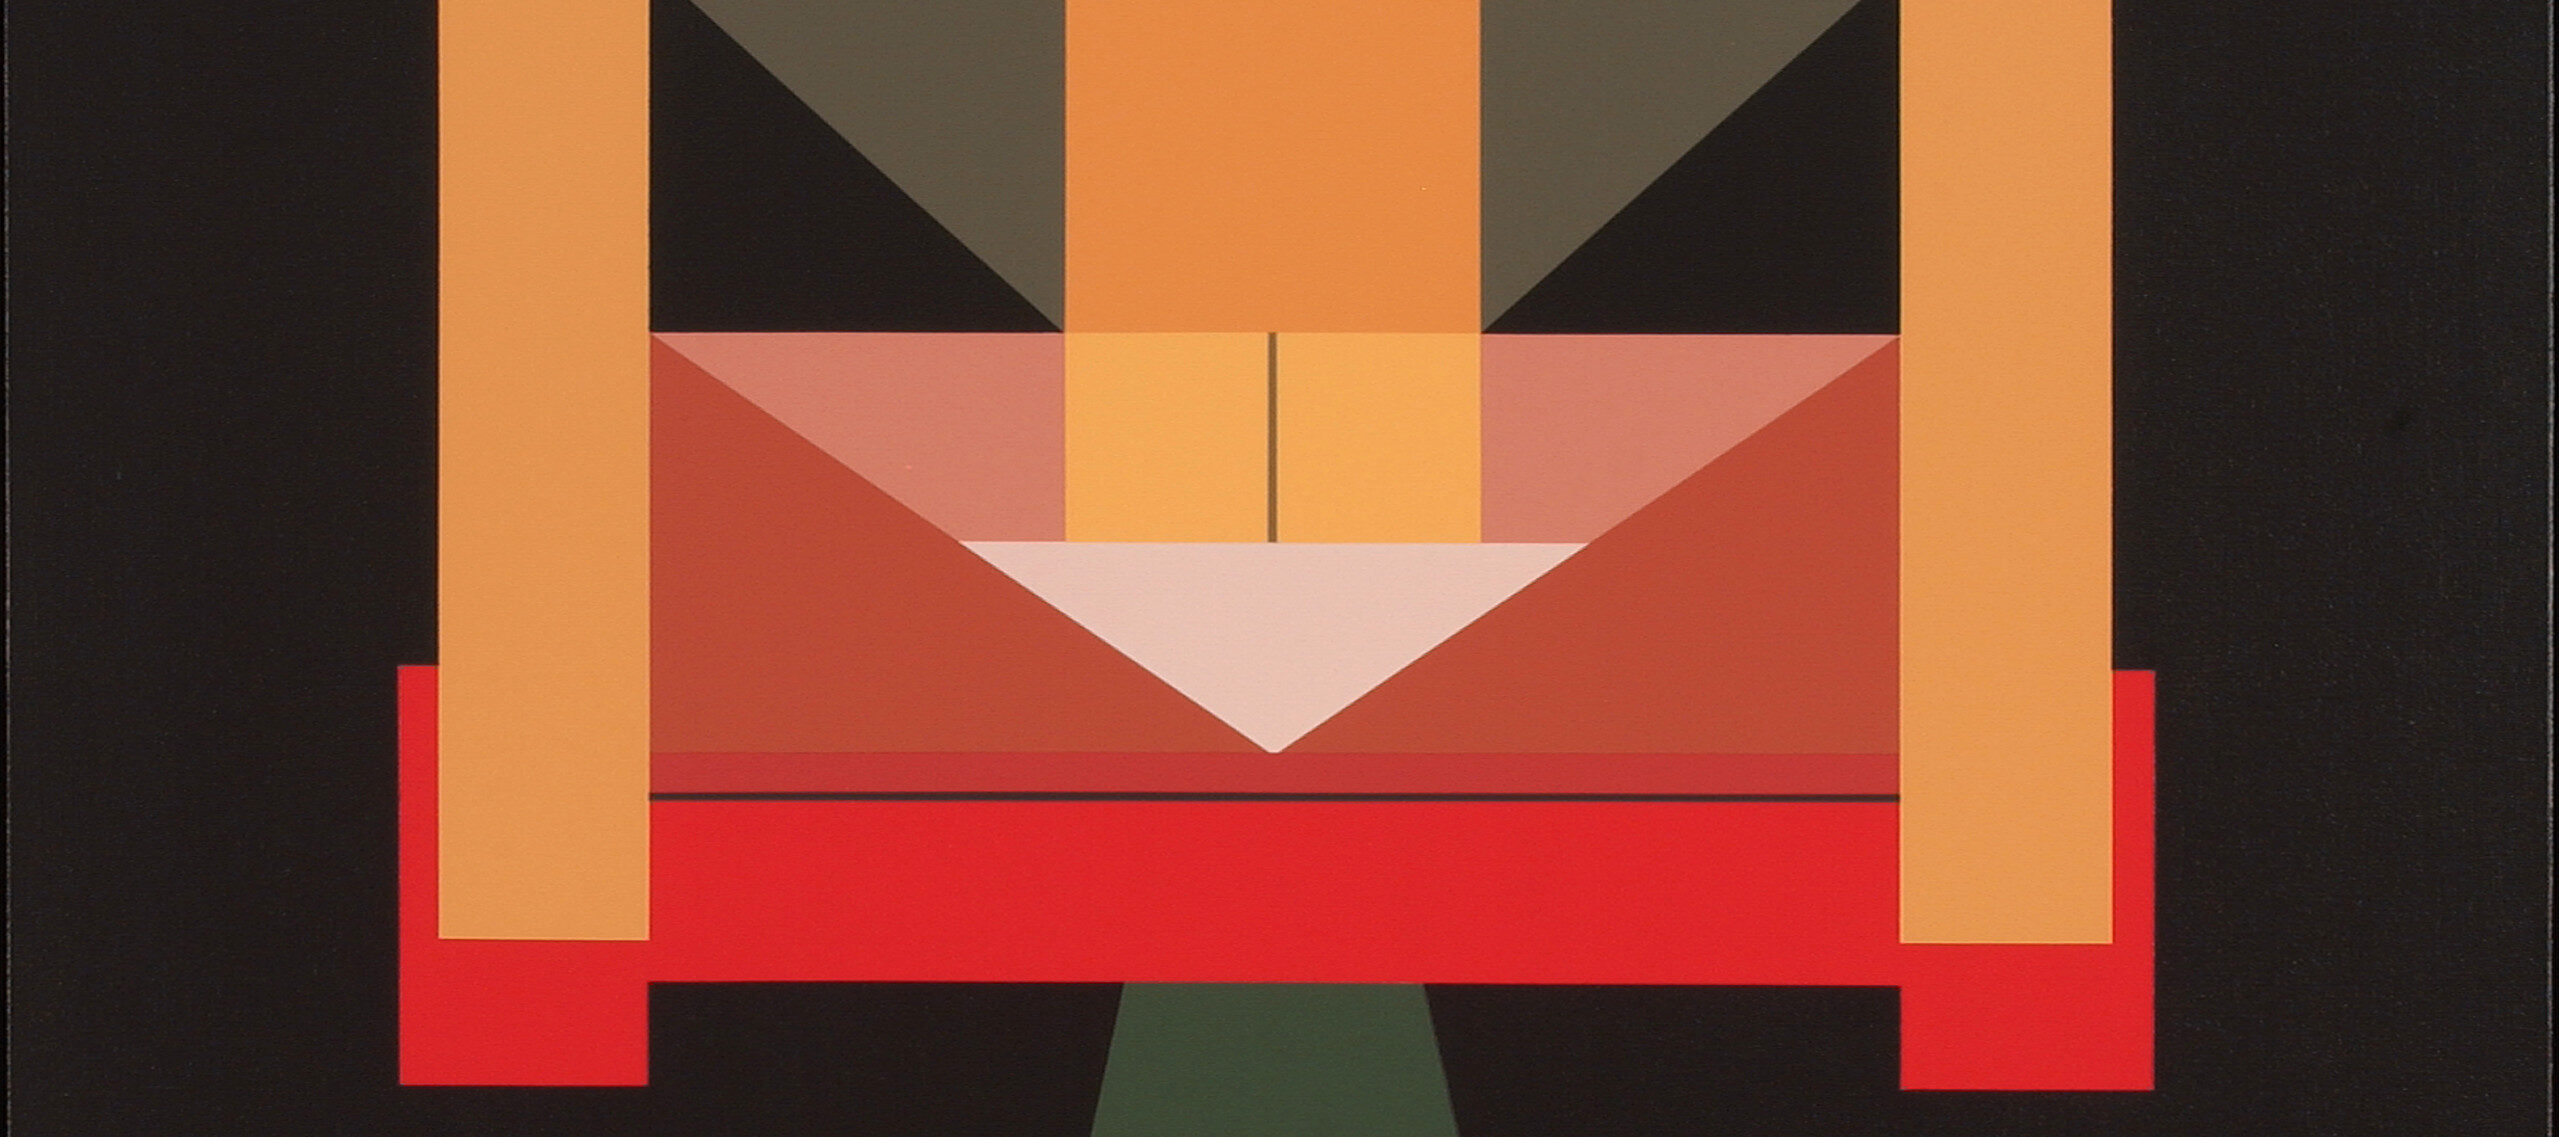 An abstract geometric painting featuring three peach colored rectangular columns atop a plane of dark brown, grey, and teal green. There are also red, pink, and white segments that form triangles, rectangles, and squares.